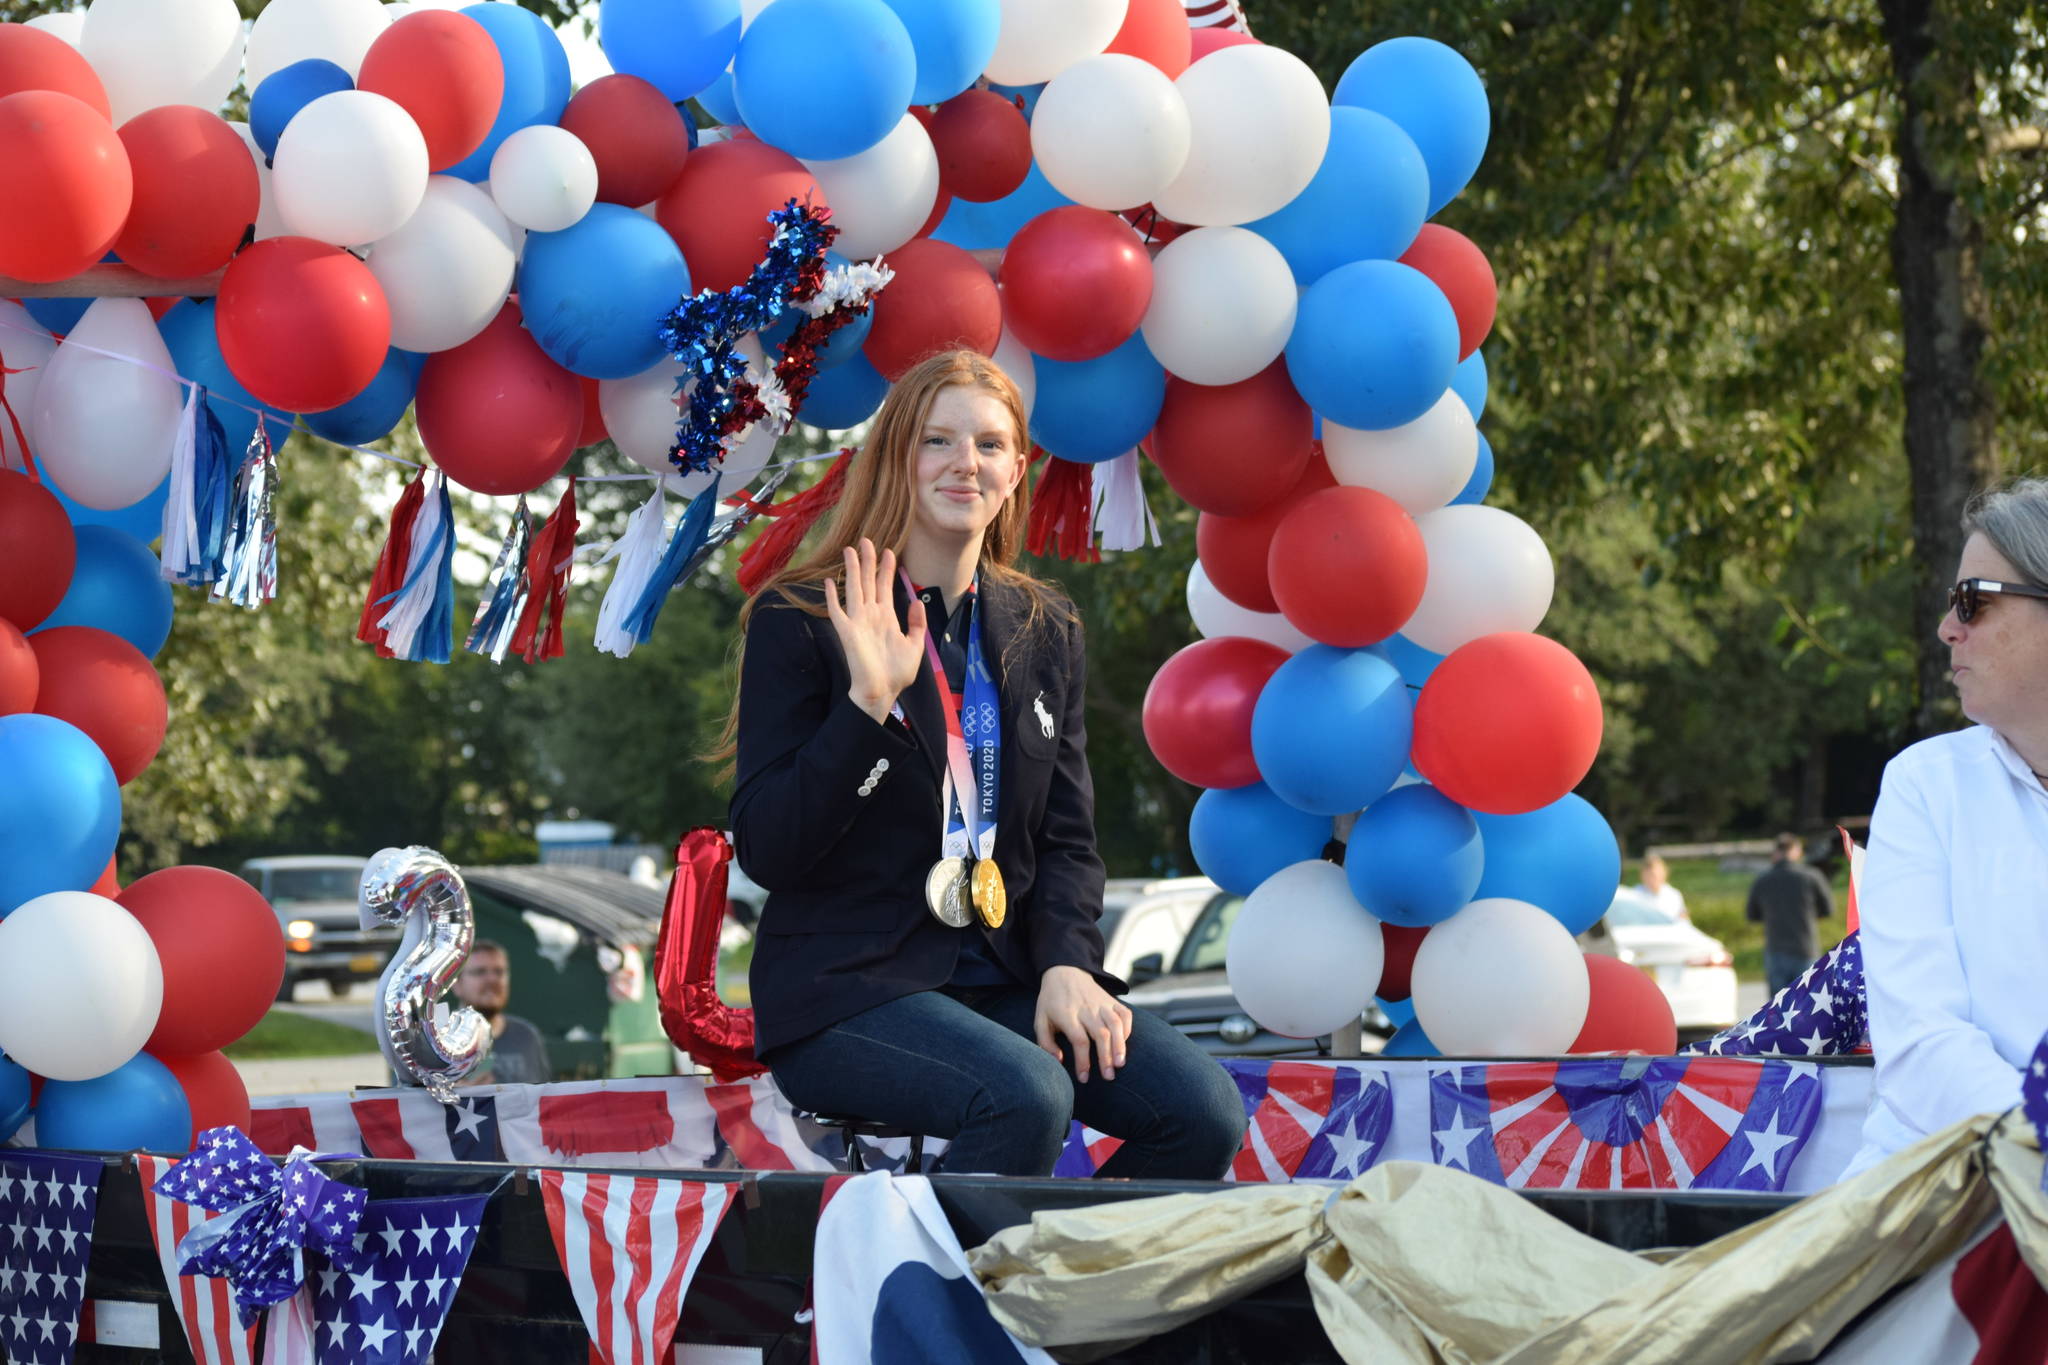 Olympic gold medalist Lydia Jacoby waves to the crowd in Seward during her celebratory parade on Thursday, August 5, 2021. (Camille Botello / Peninsula Clarion)